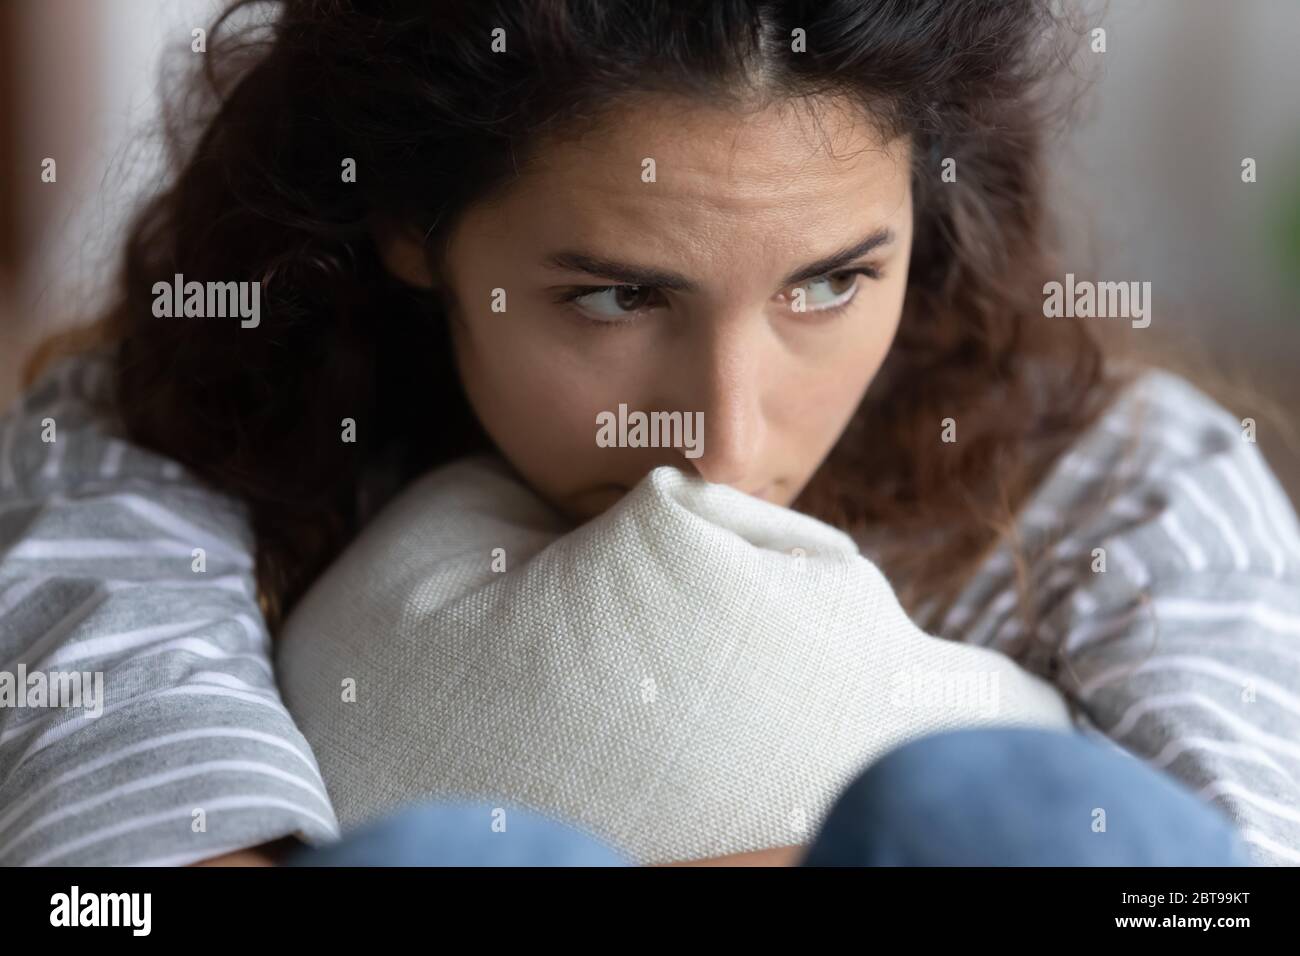 Close up unhappy depressed woman thinking about problems, hugging pillow Stock Photo